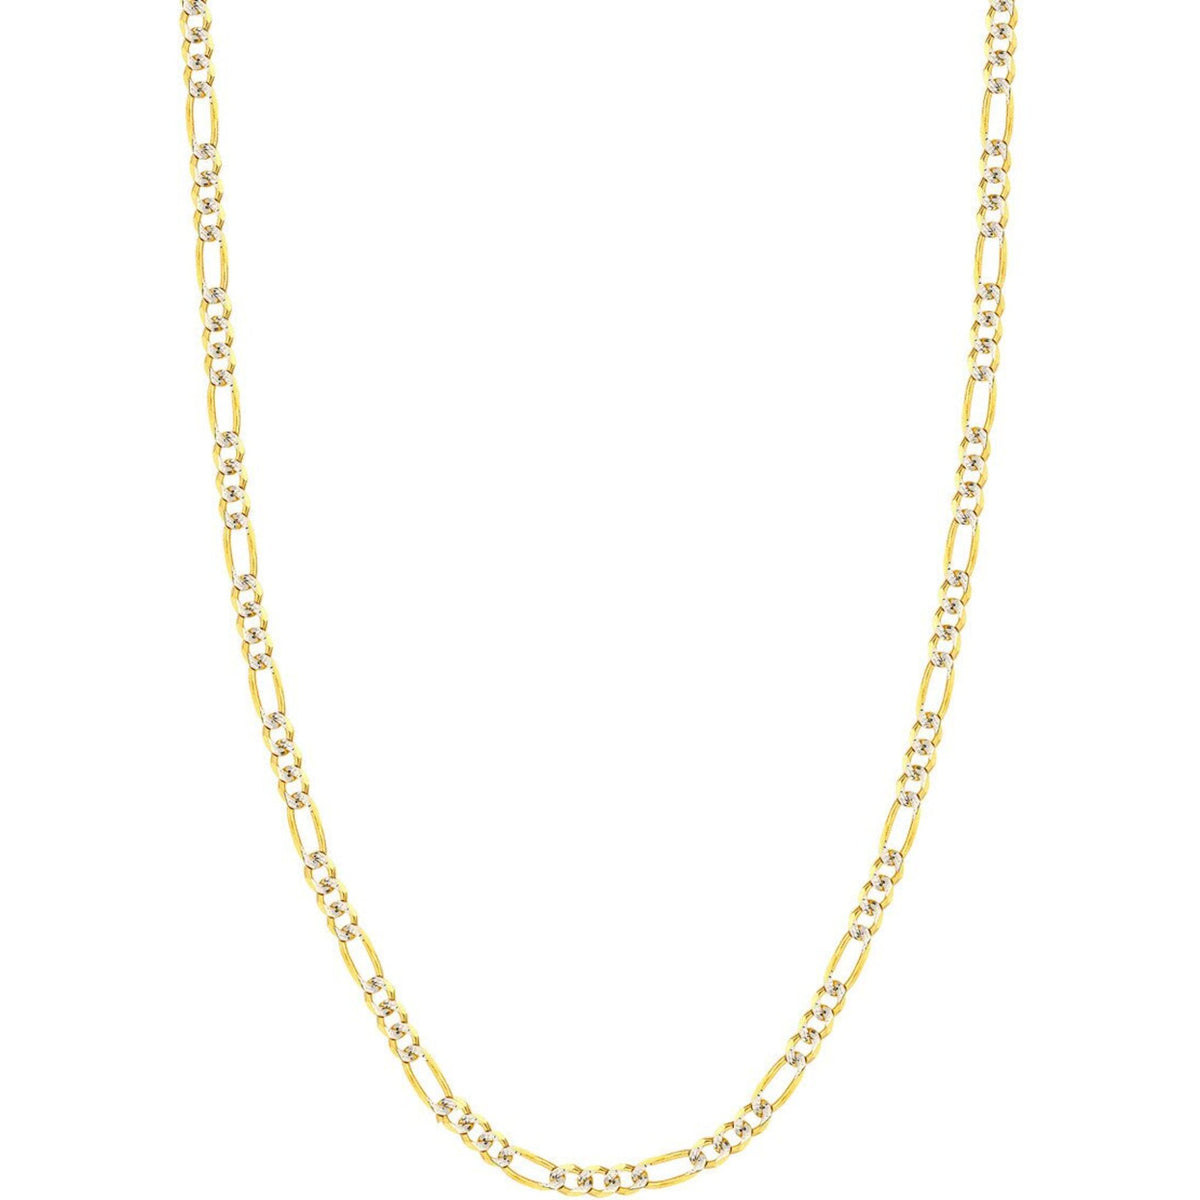 Olas d'Oro 30" Necklace - 14K Yellow/White Gold 4.75mm Two-Tone Pave Figaro Chain with Lobster Lock